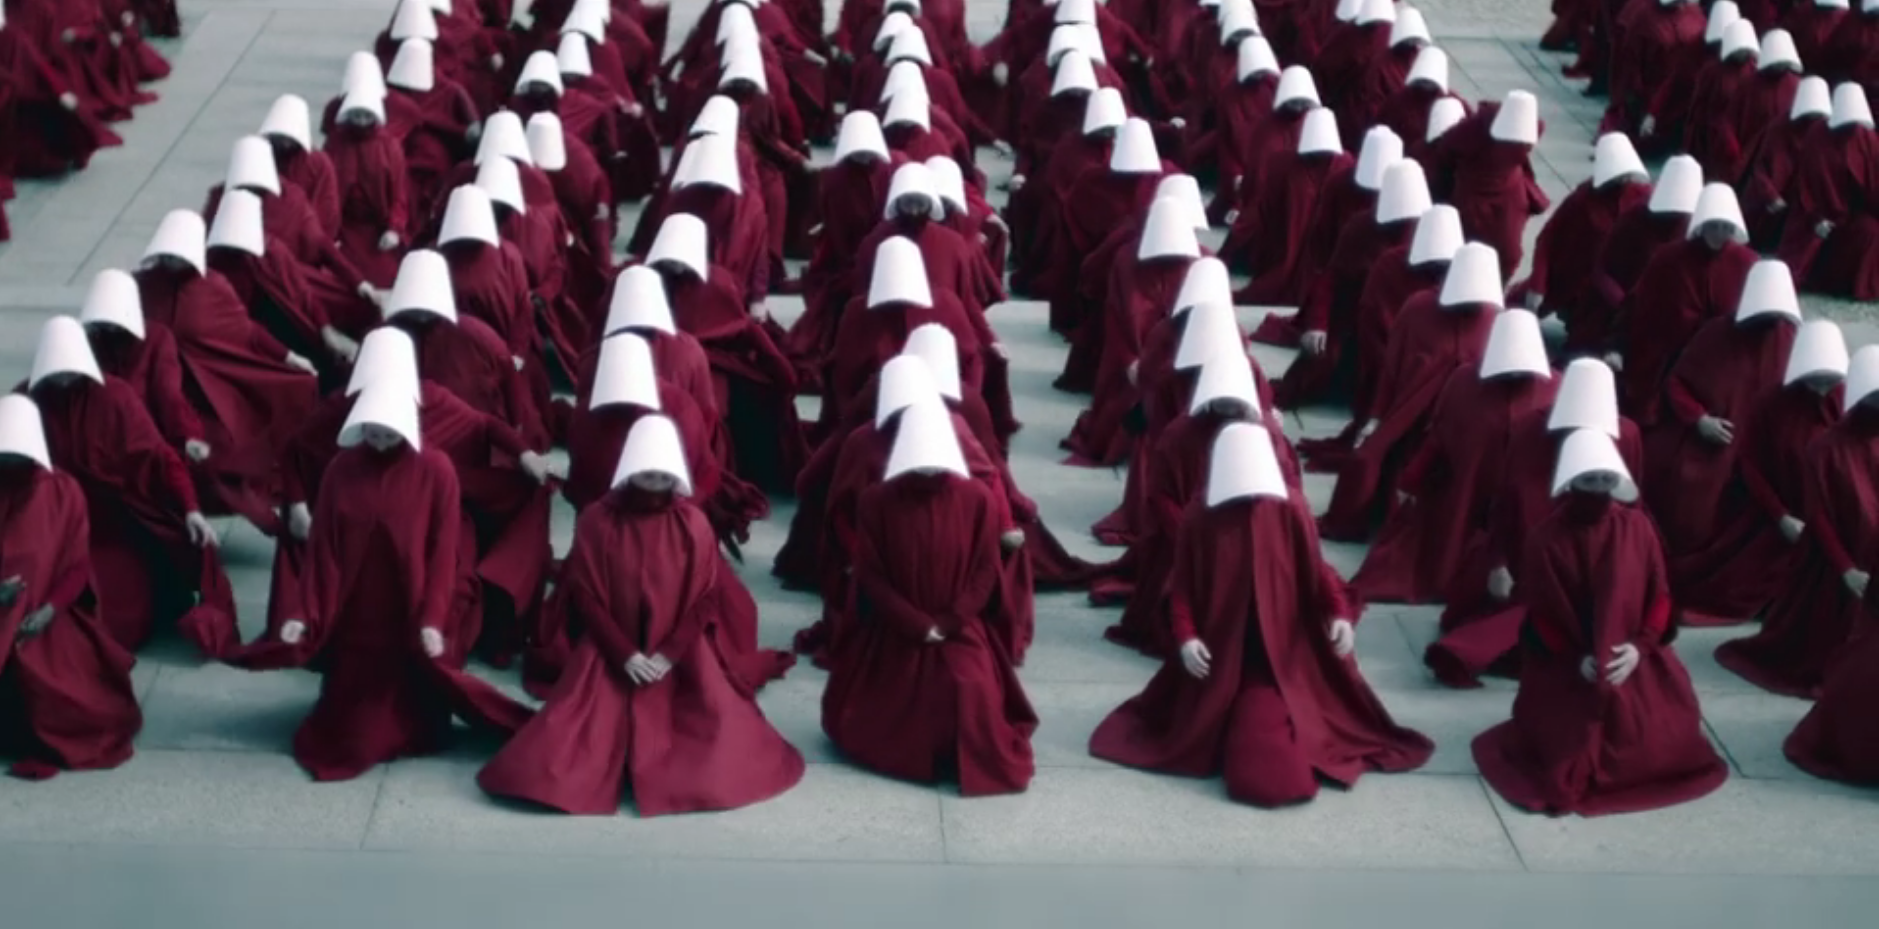 Women silenced, at mass prayer depicted in The Handmaid's Tale